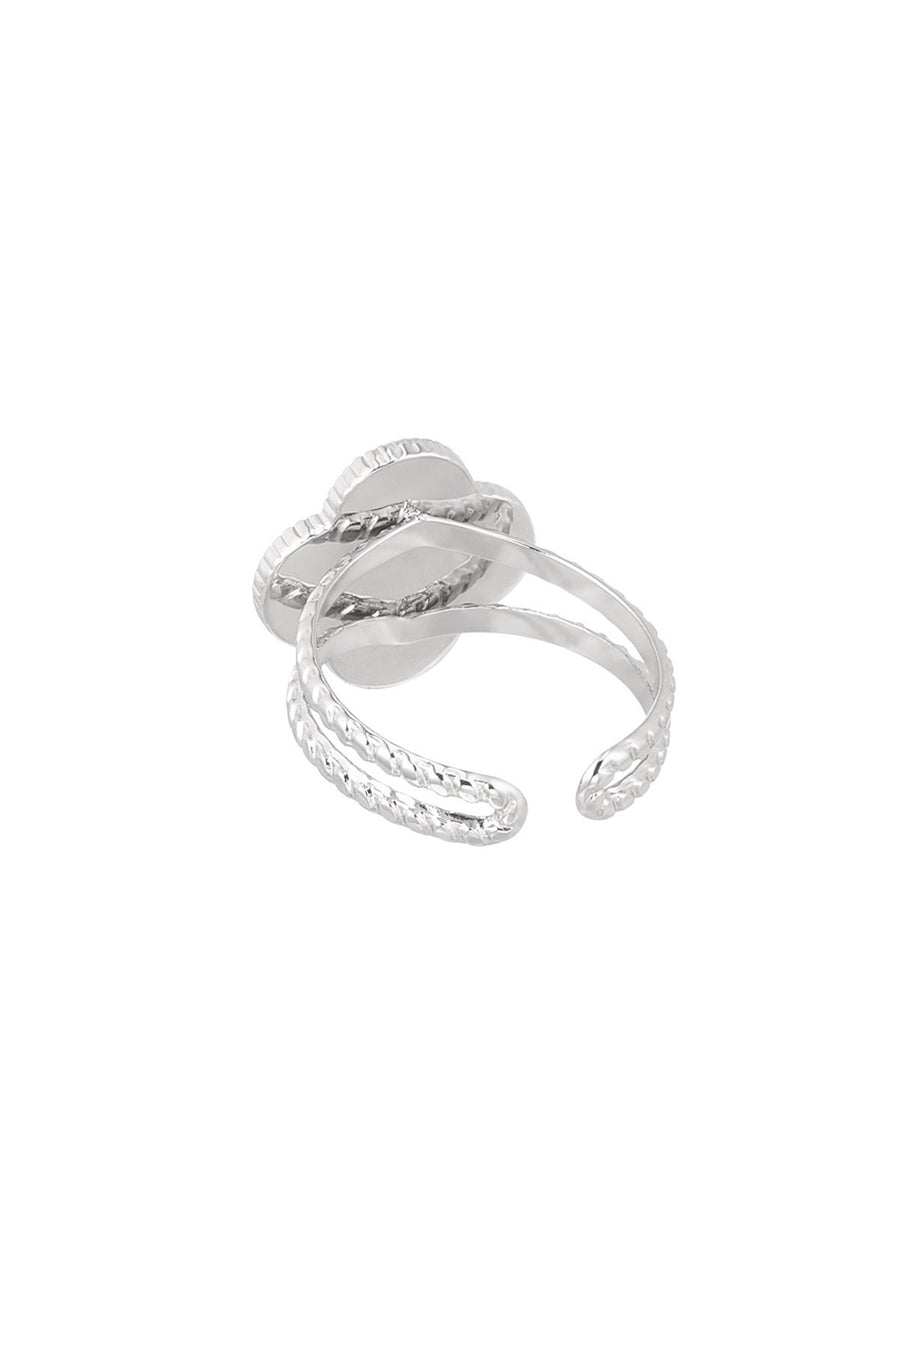 Clover Love Ring  Gold & Silver Available